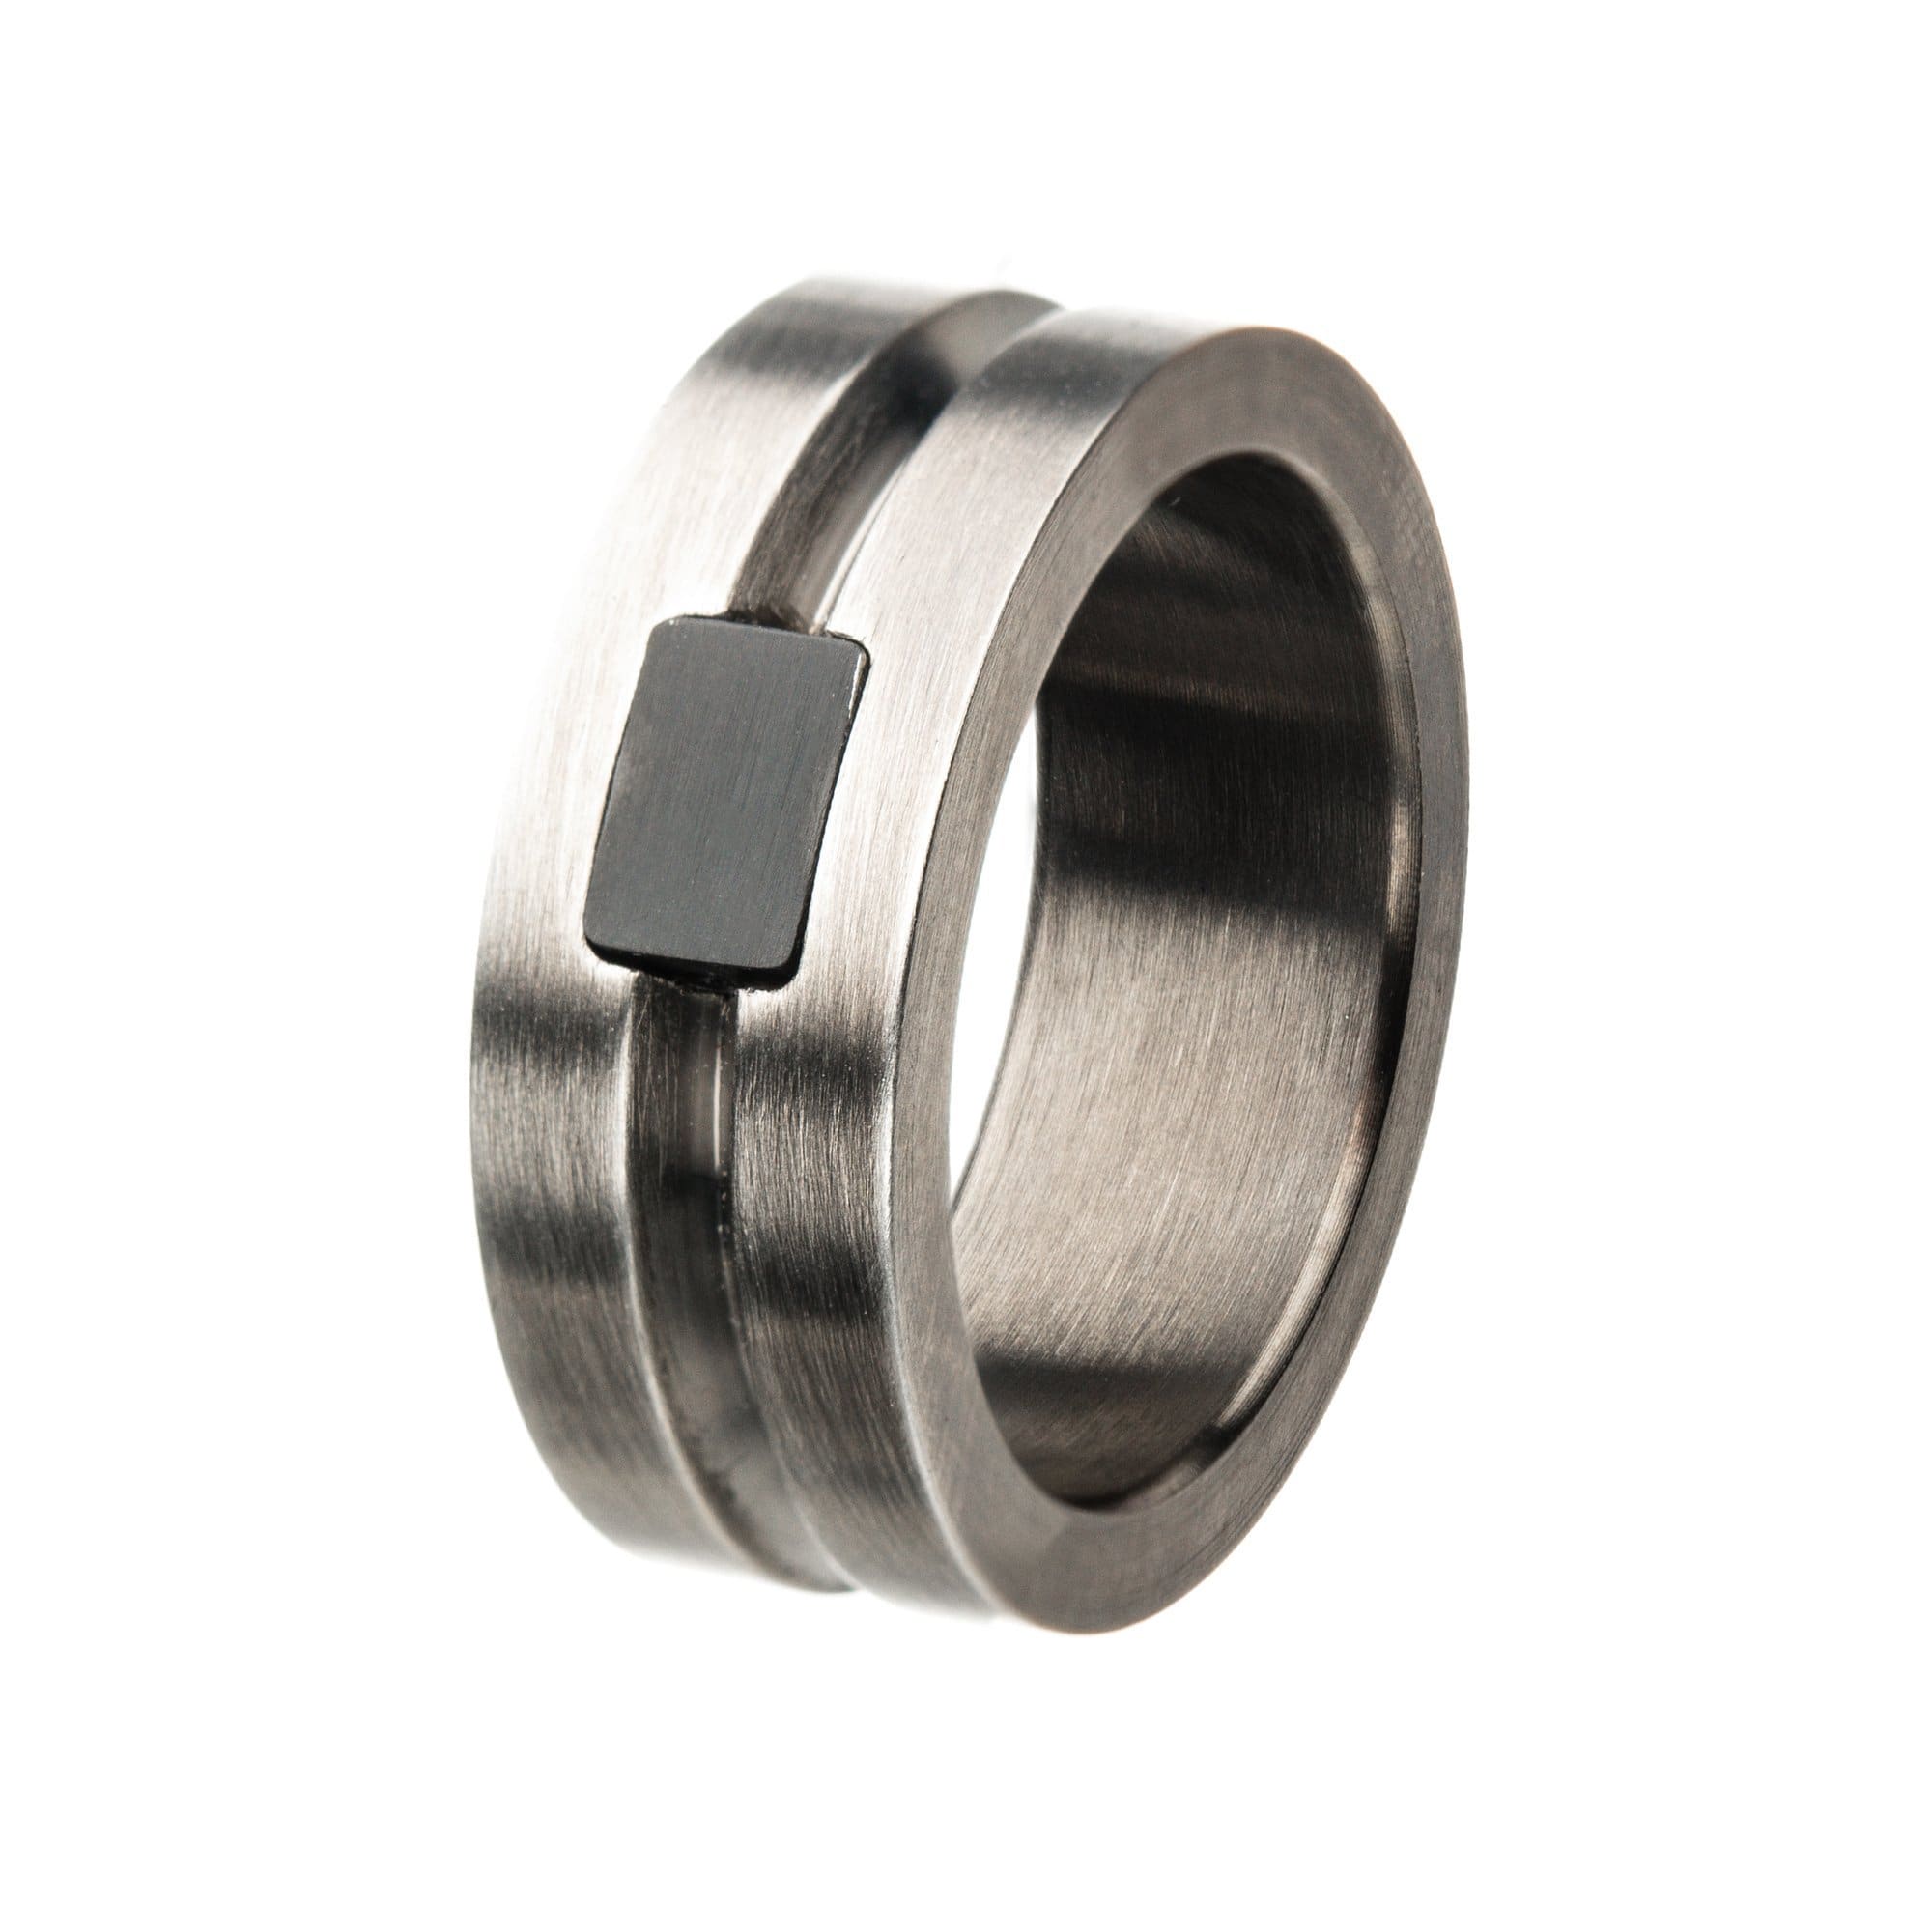 INOX JEWELRY Rings Black Stainless Steel with Antique White Bronze Industrial Design Band Ring